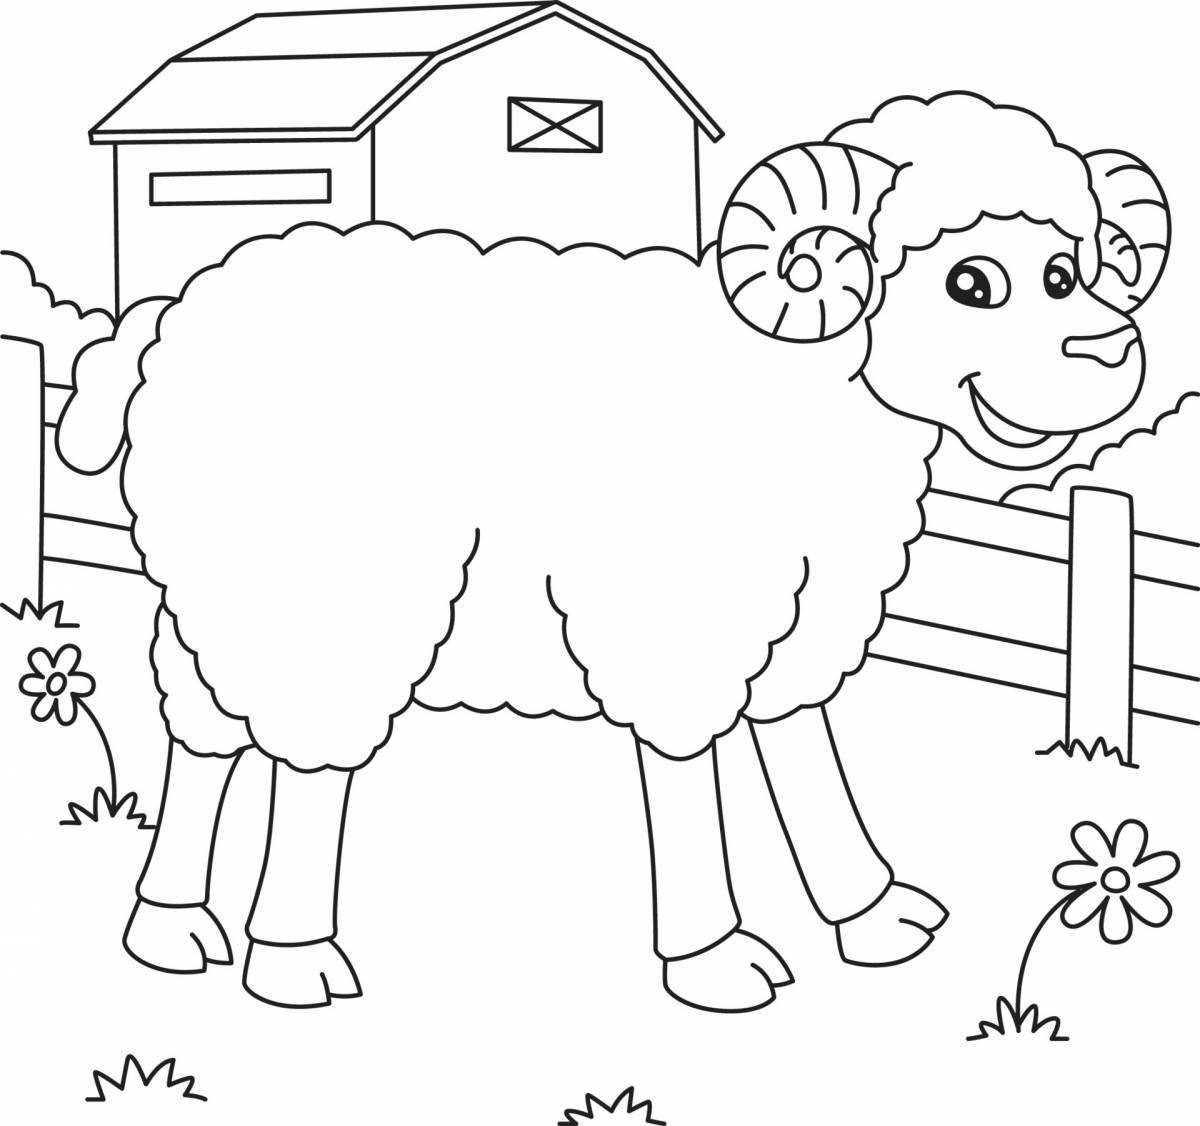 Sweet sheep coloring book for 4-5 year olds